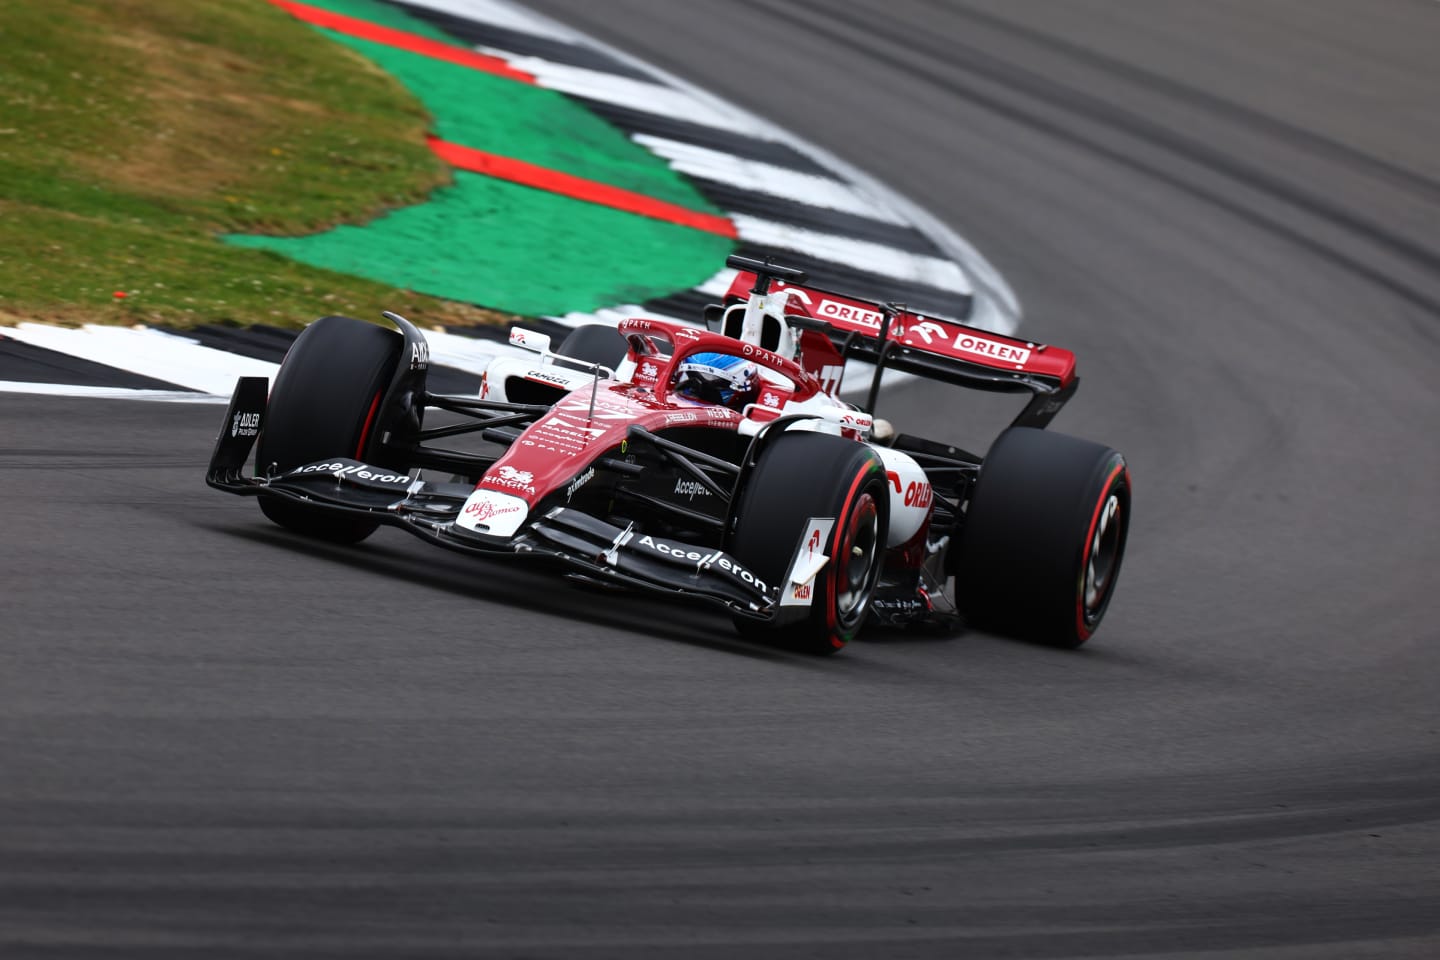 NORTHAMPTON, ENGLAND - JULY 02: Valtteri Bottas of Finland driving the (77) Alfa Romeo F1 C42 Ferrari on track during final practice ahead of the F1 Grand Prix of Great Britain at Silverstone on July 02, 2022 in Northampton, England. (Photo by Mark Thompson/Getty Images)